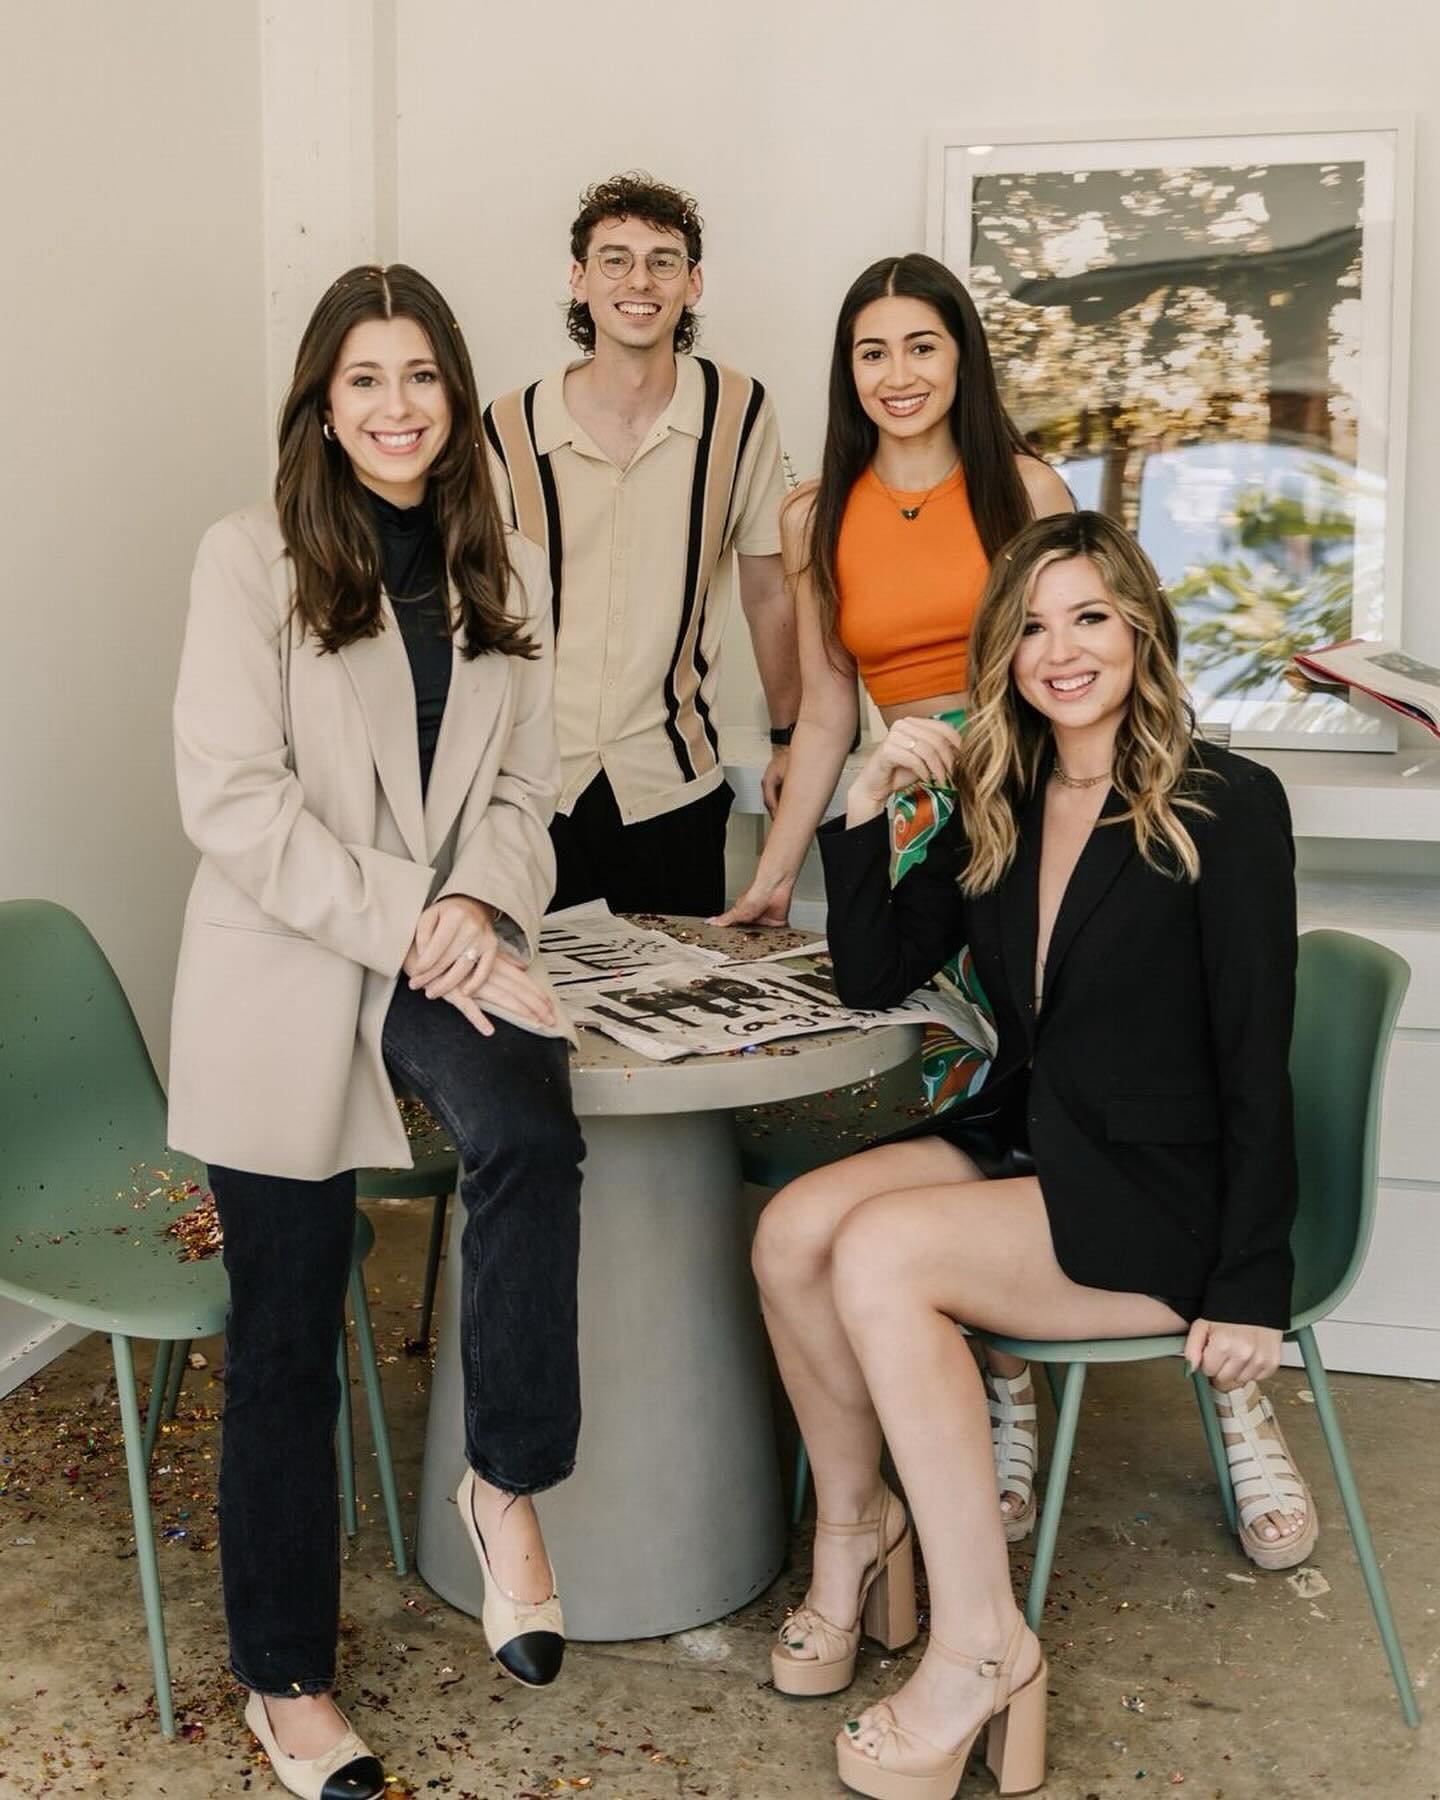 THIS JUST IN! 🗞 Swipe to reveal Remember Media&rsquo;s breaking news &rarr; 

WE&rsquo;RE HIRING AGAIN BABES! Share this post with someone who really wants to pursue a career in social media with the best team around 💌💚

We&rsquo;re so excited to 